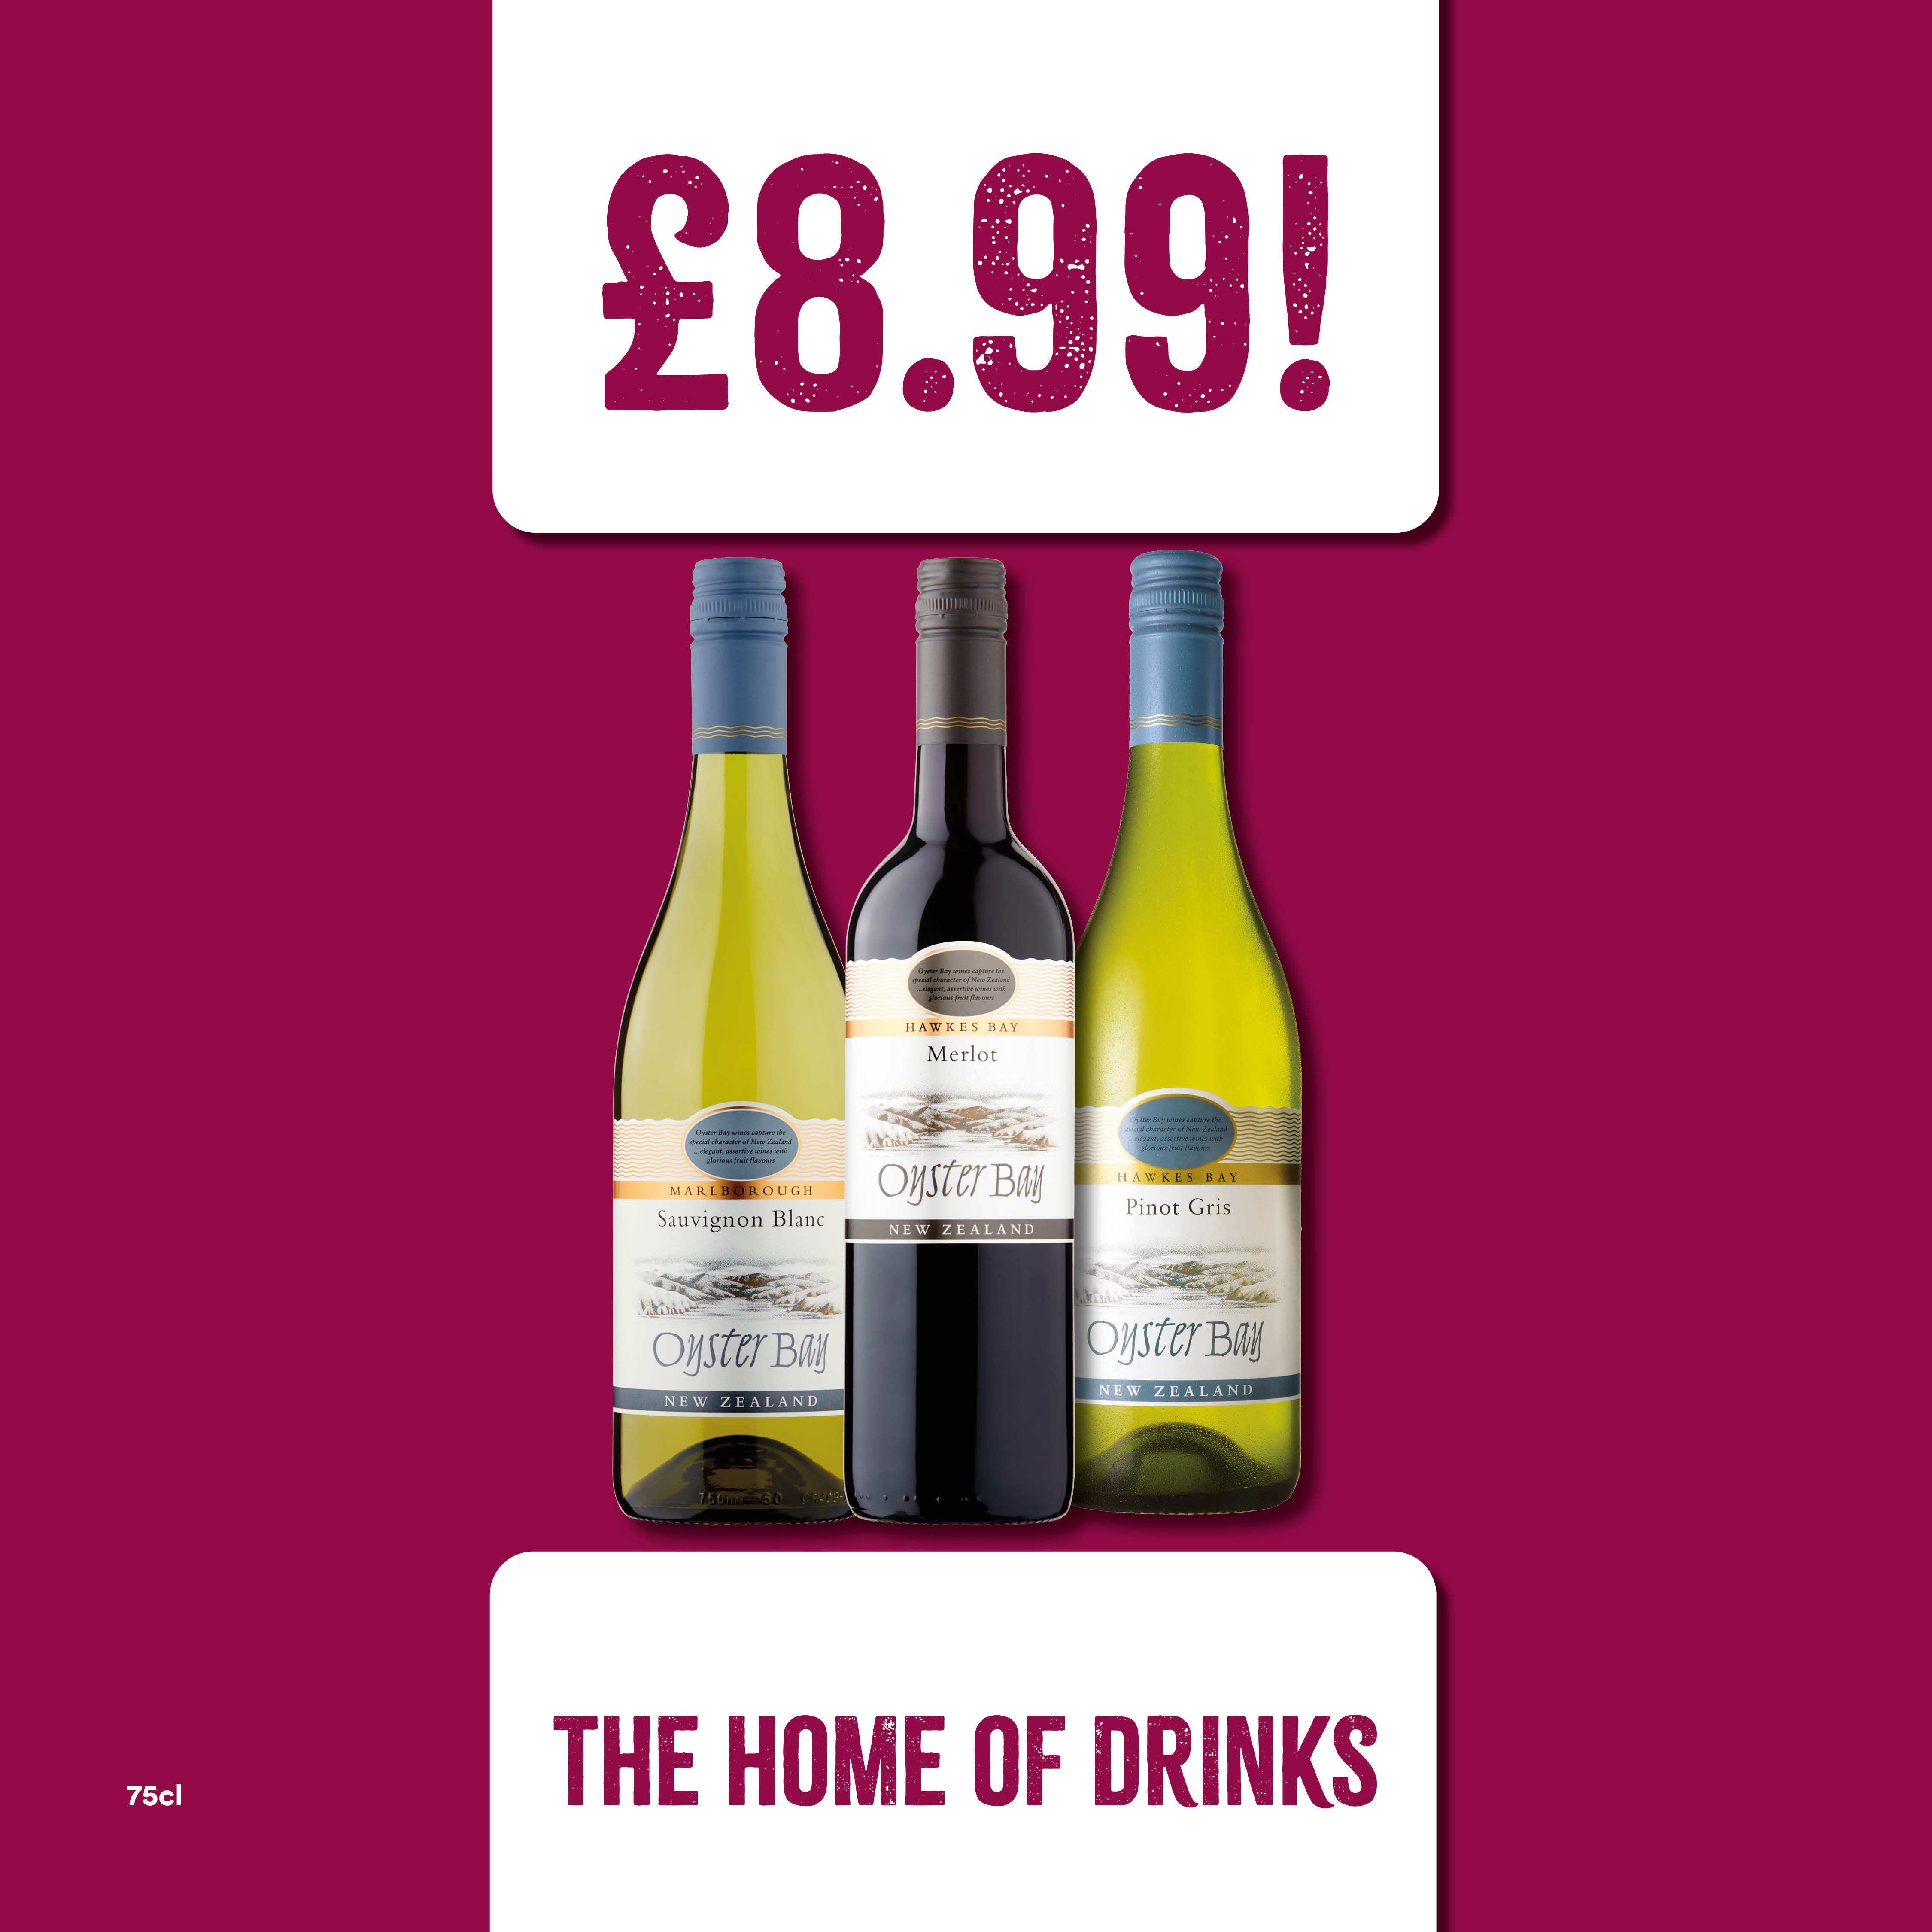 Oyster Bay Wines - £8.99 Bargain Booze Newport Pagnell 01908 612653